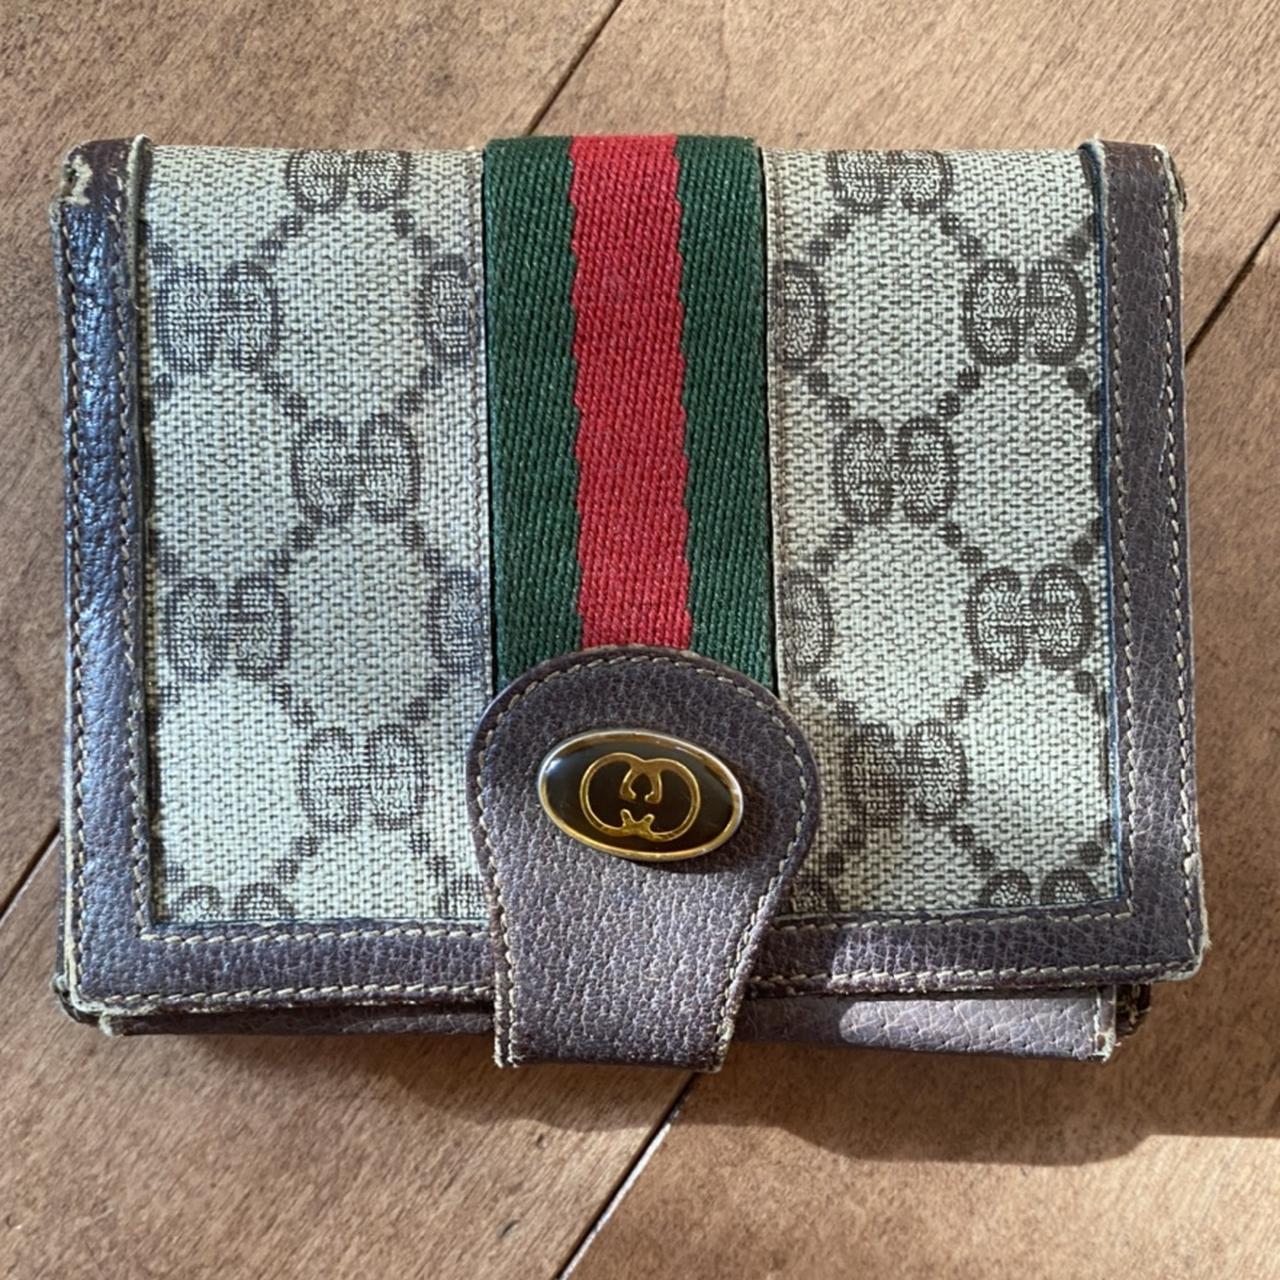 100% AUTHENTIC GUCCI WALLET WITH LEATHER DETAILS AND - Depop